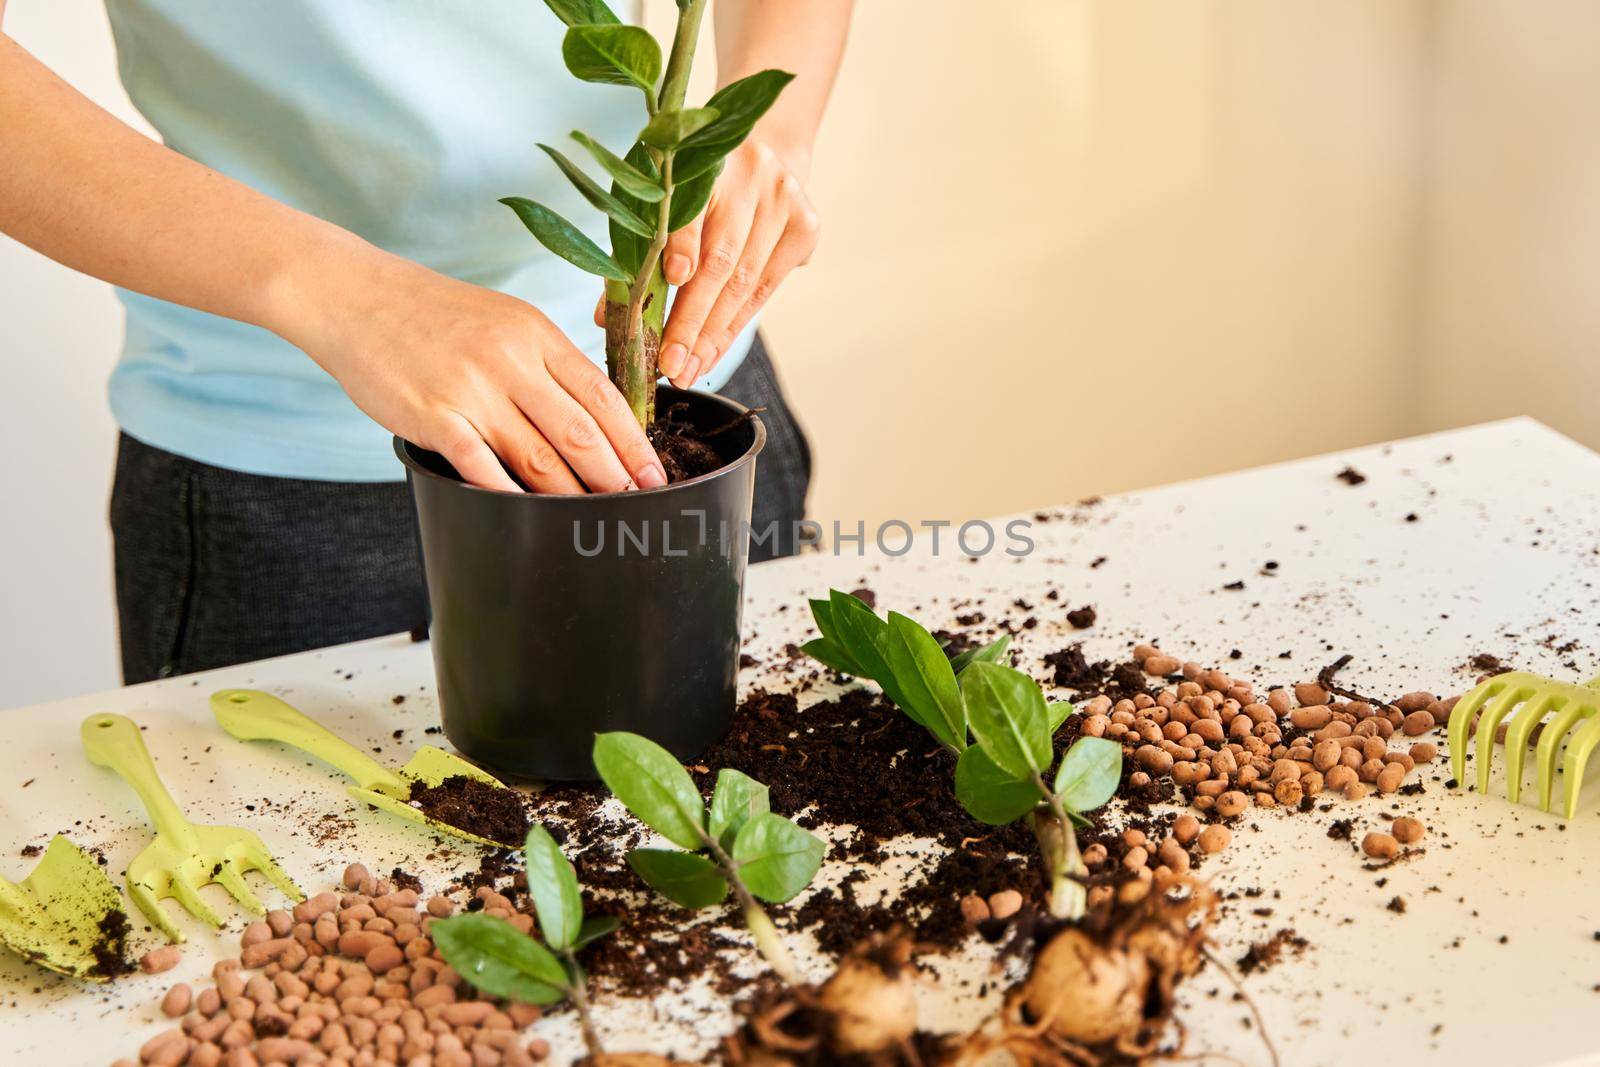 The girl will transplant a home flower because it has grown too large to fit in a pot.